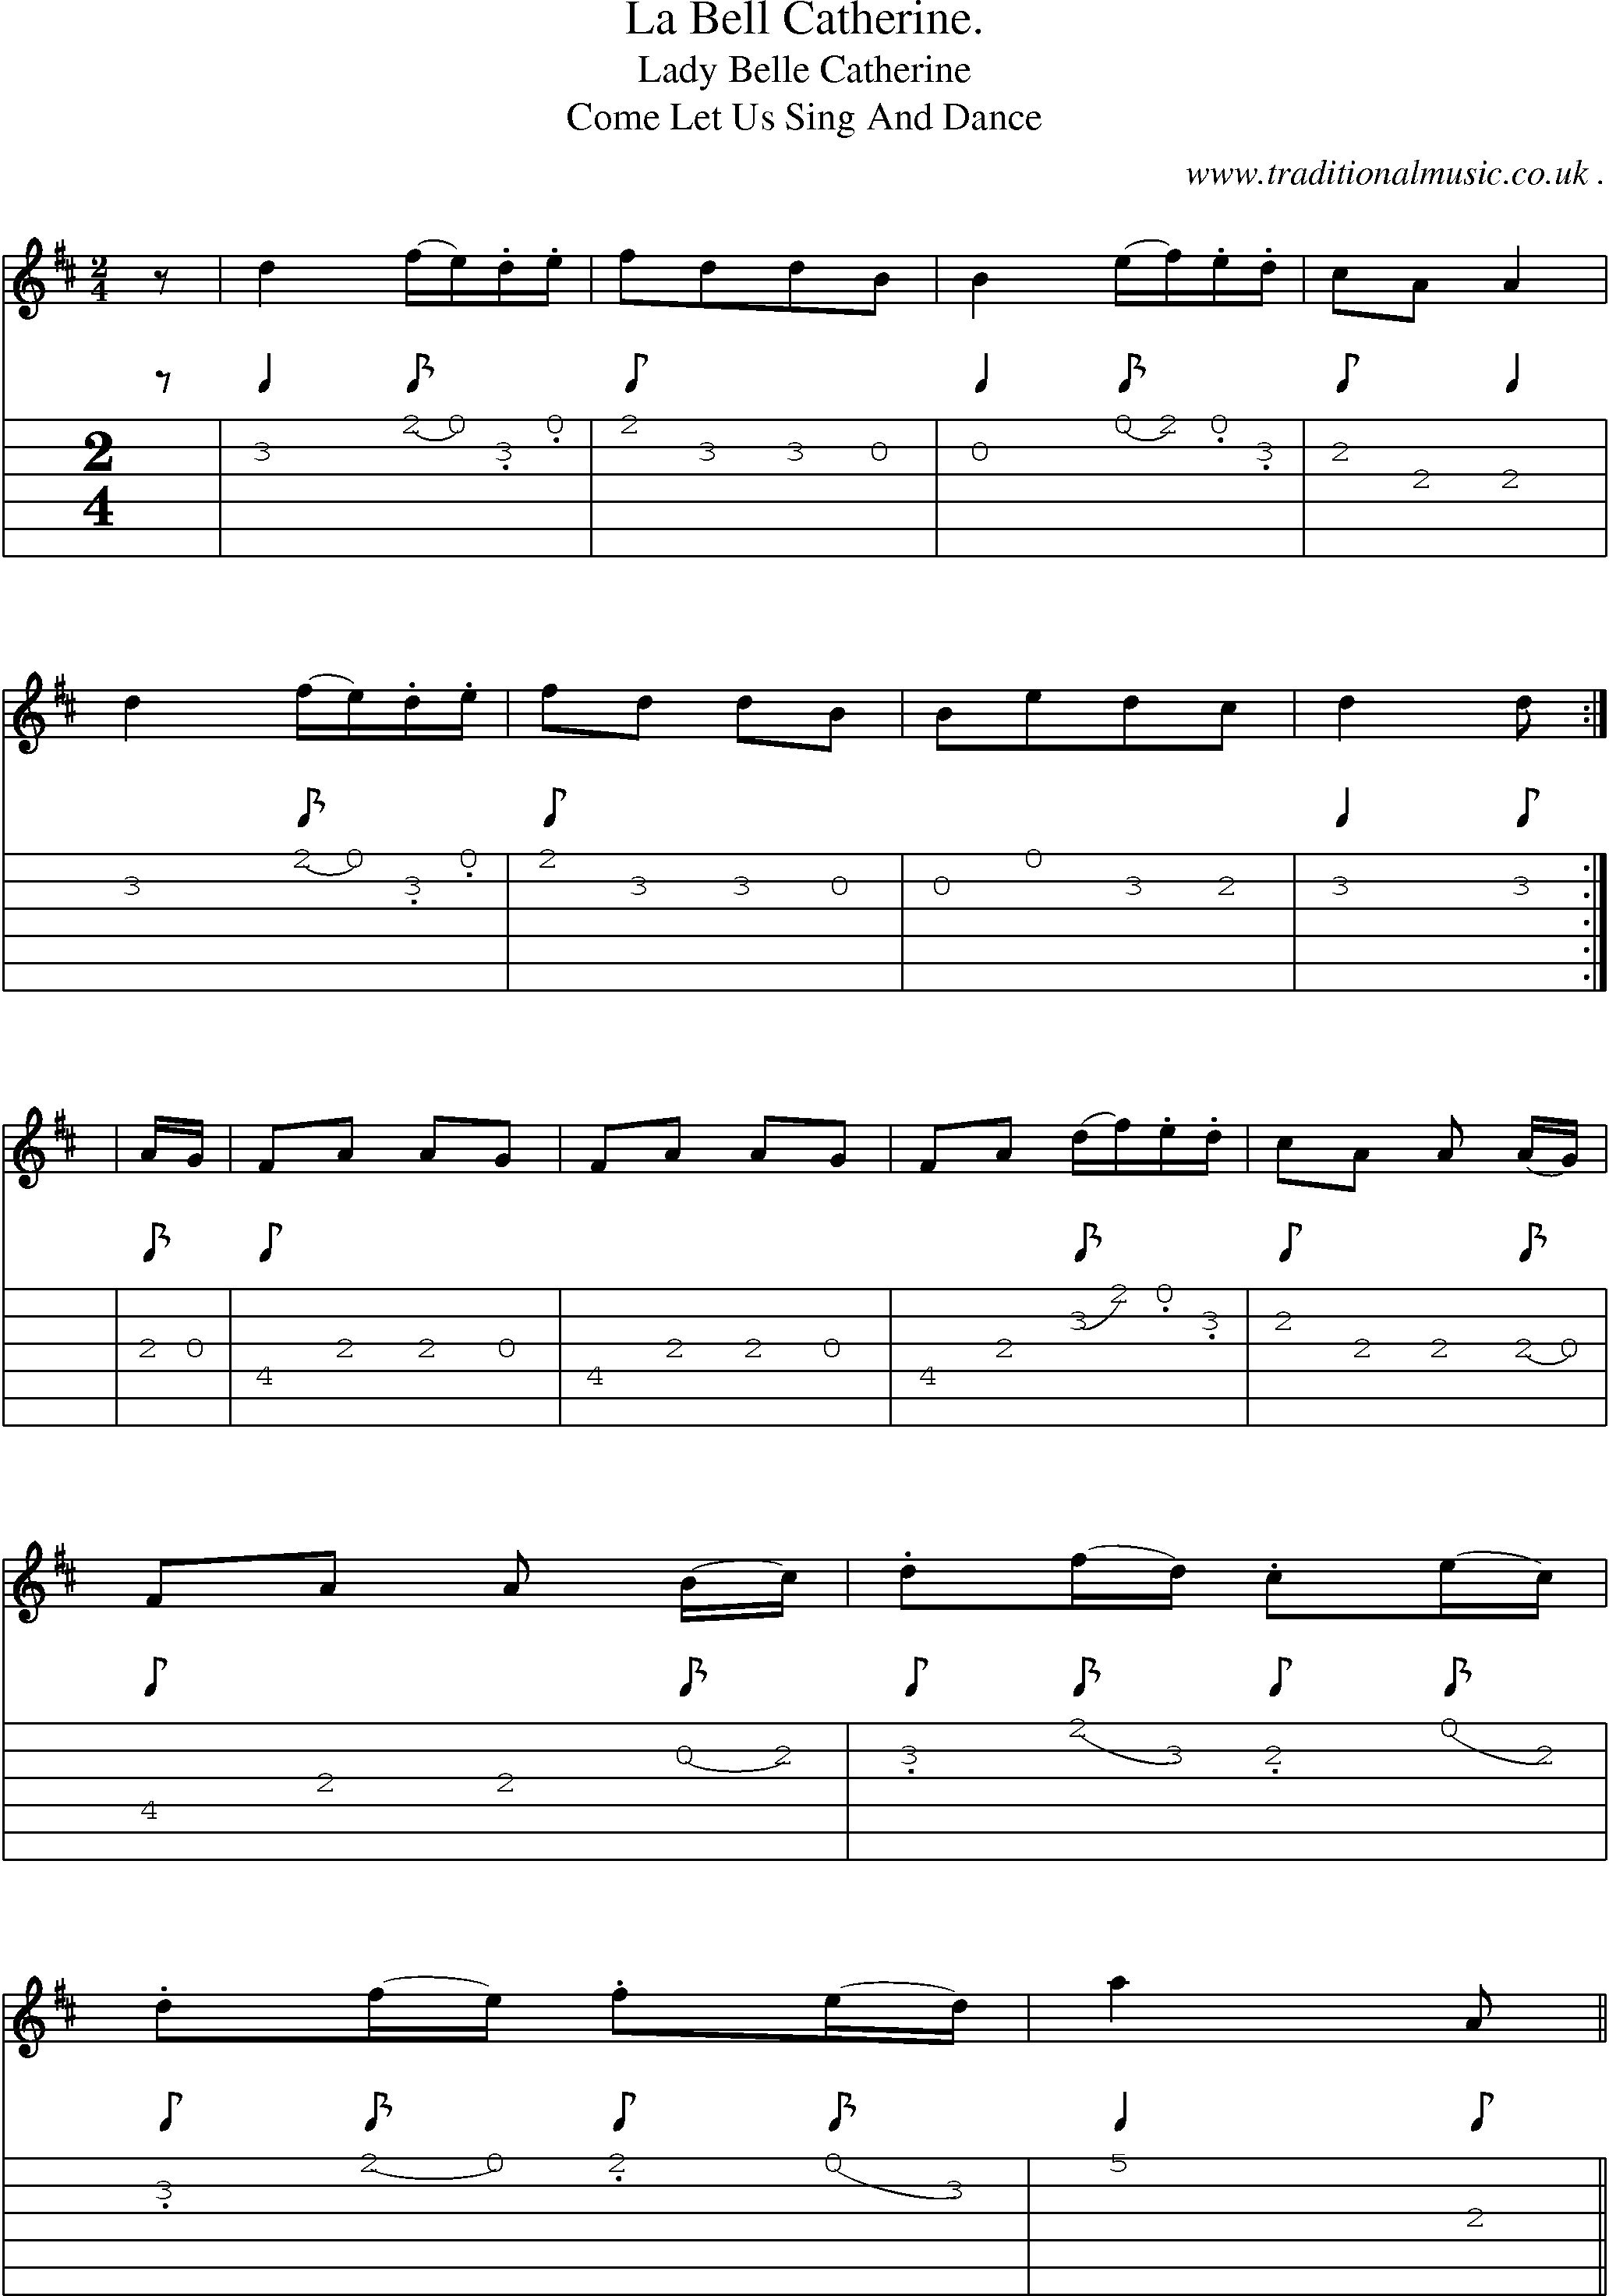 Sheet-Music and Guitar Tabs for La Bell Catherine